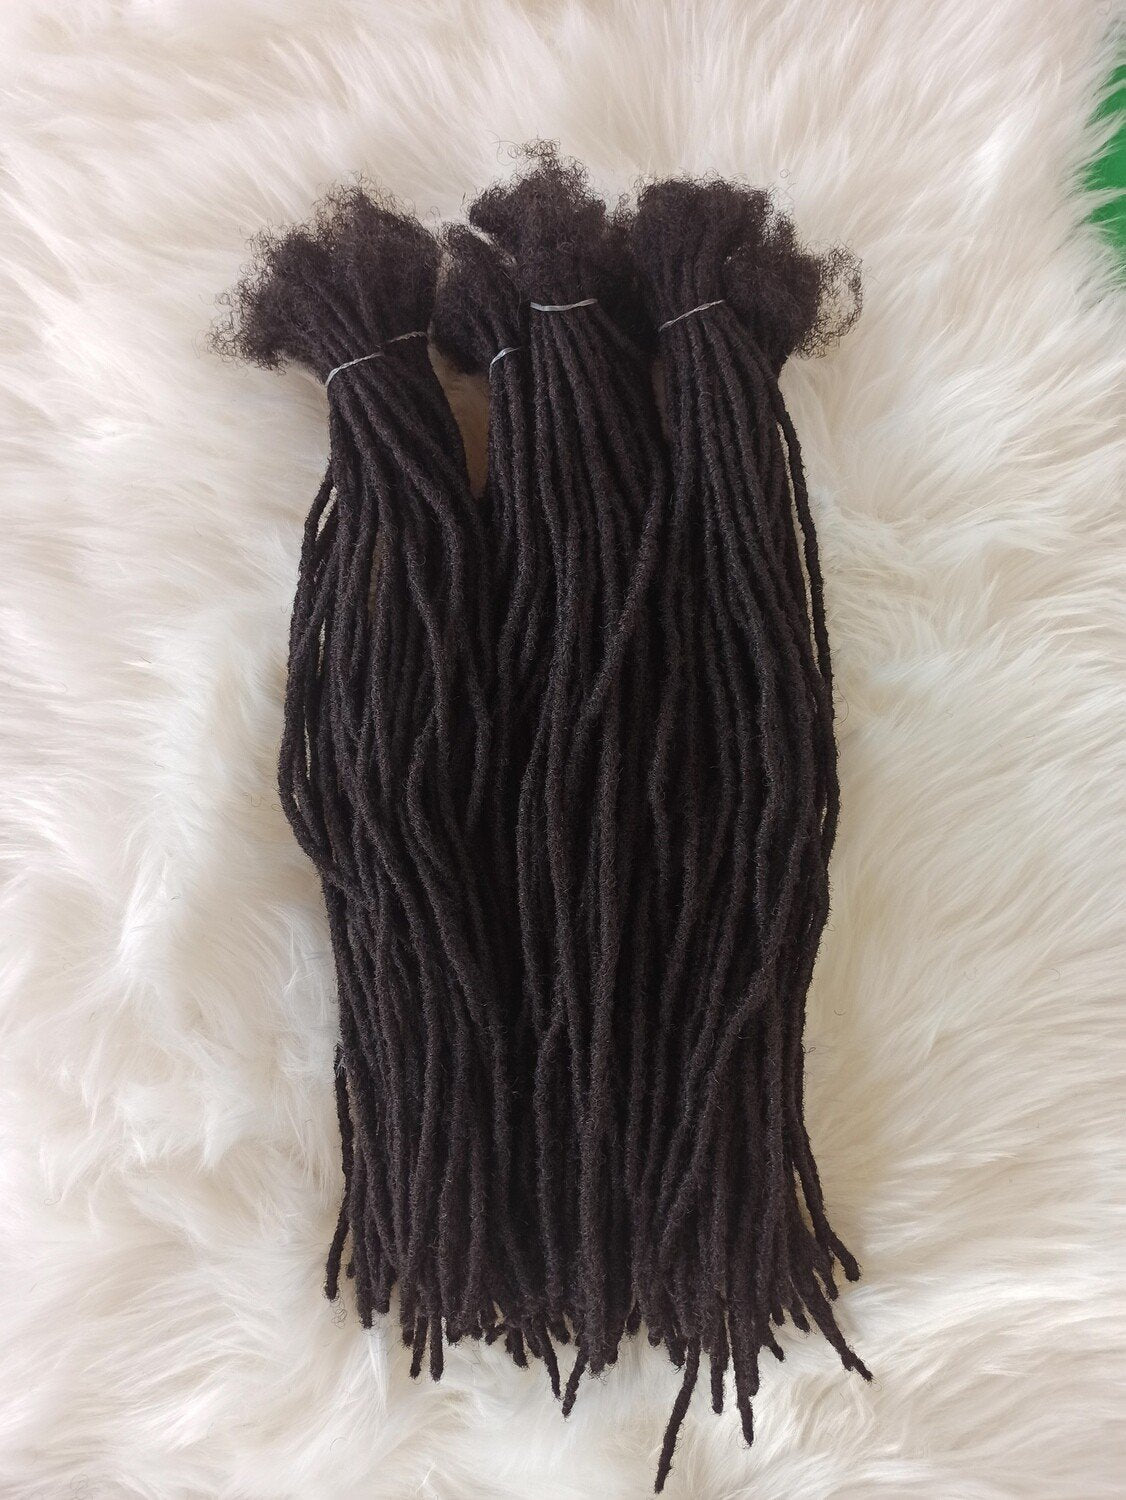 JIAJIA Teresa Small 100% Human Hair Dreadlock Extensions for Men/Women/Kids  0.4cm Width Full Hand-made Permanent Dread Locs Human Hair Can be Dyed and  Bleached,From JiaJia Hair(8 Inch-10Strands,Red Color) UAE | Dubai, Abu